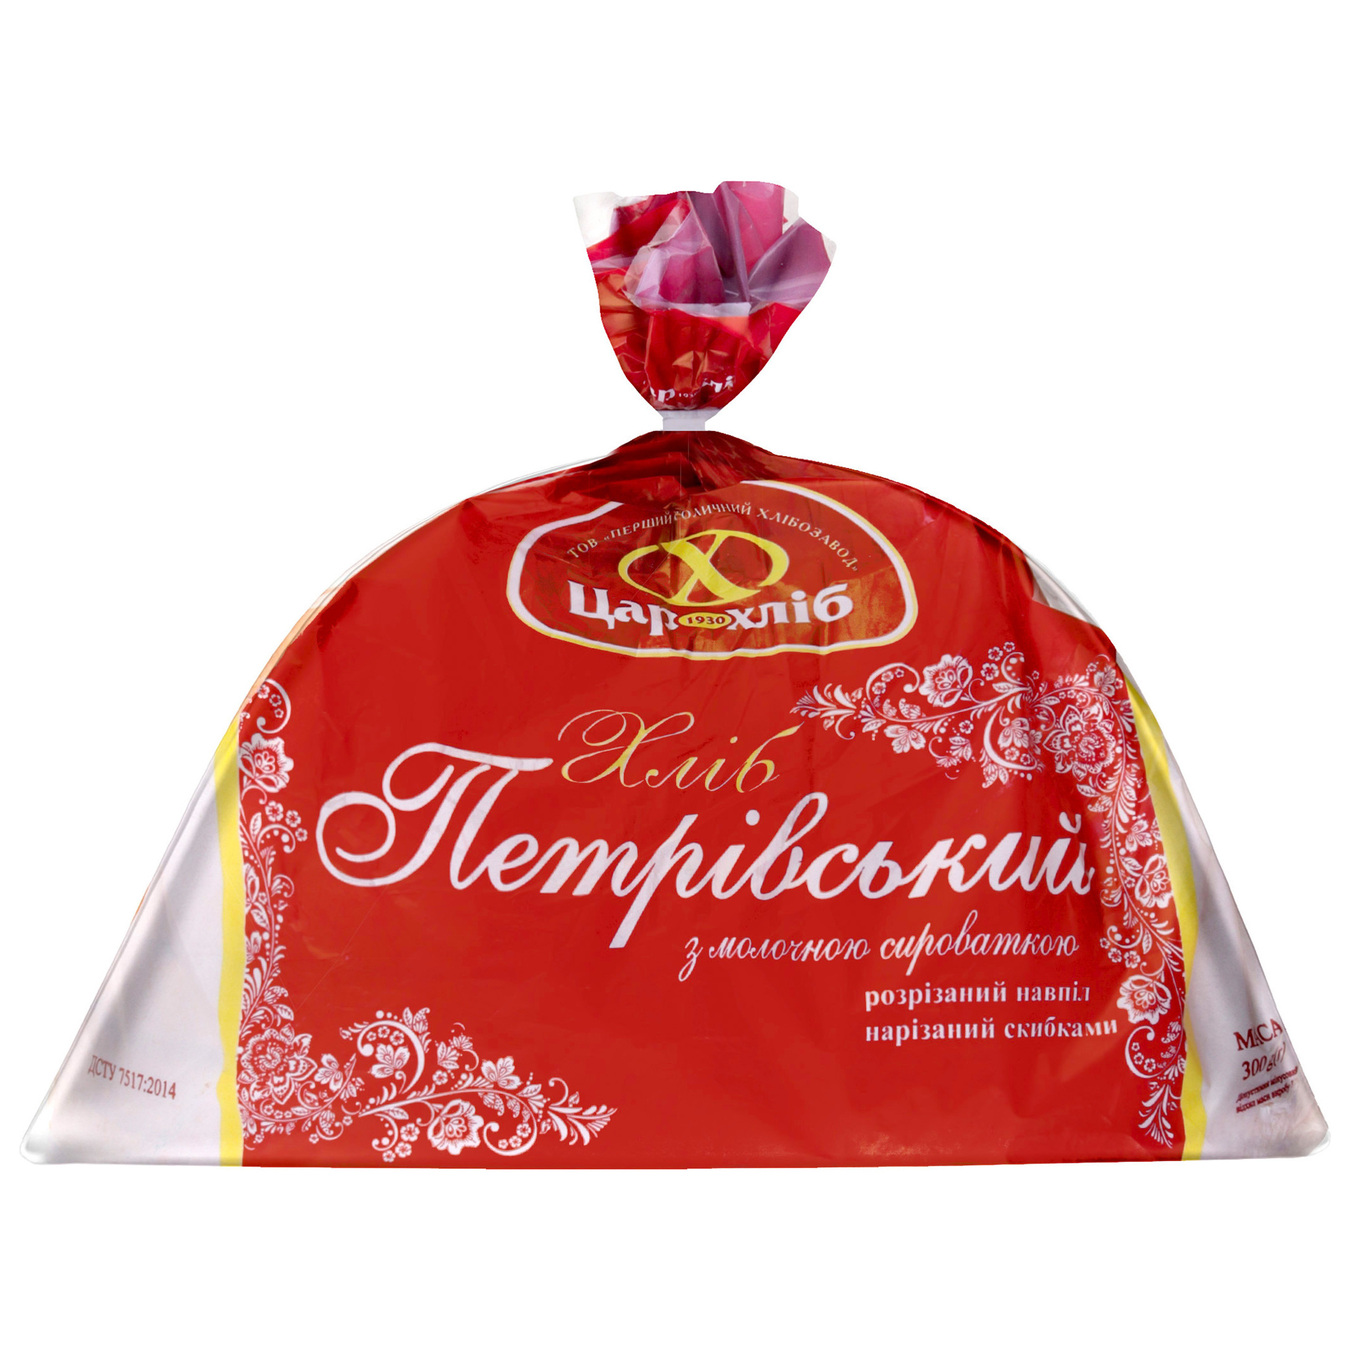 Tsar bread Petrovsky bread with whey in a cut package 0,3 kg